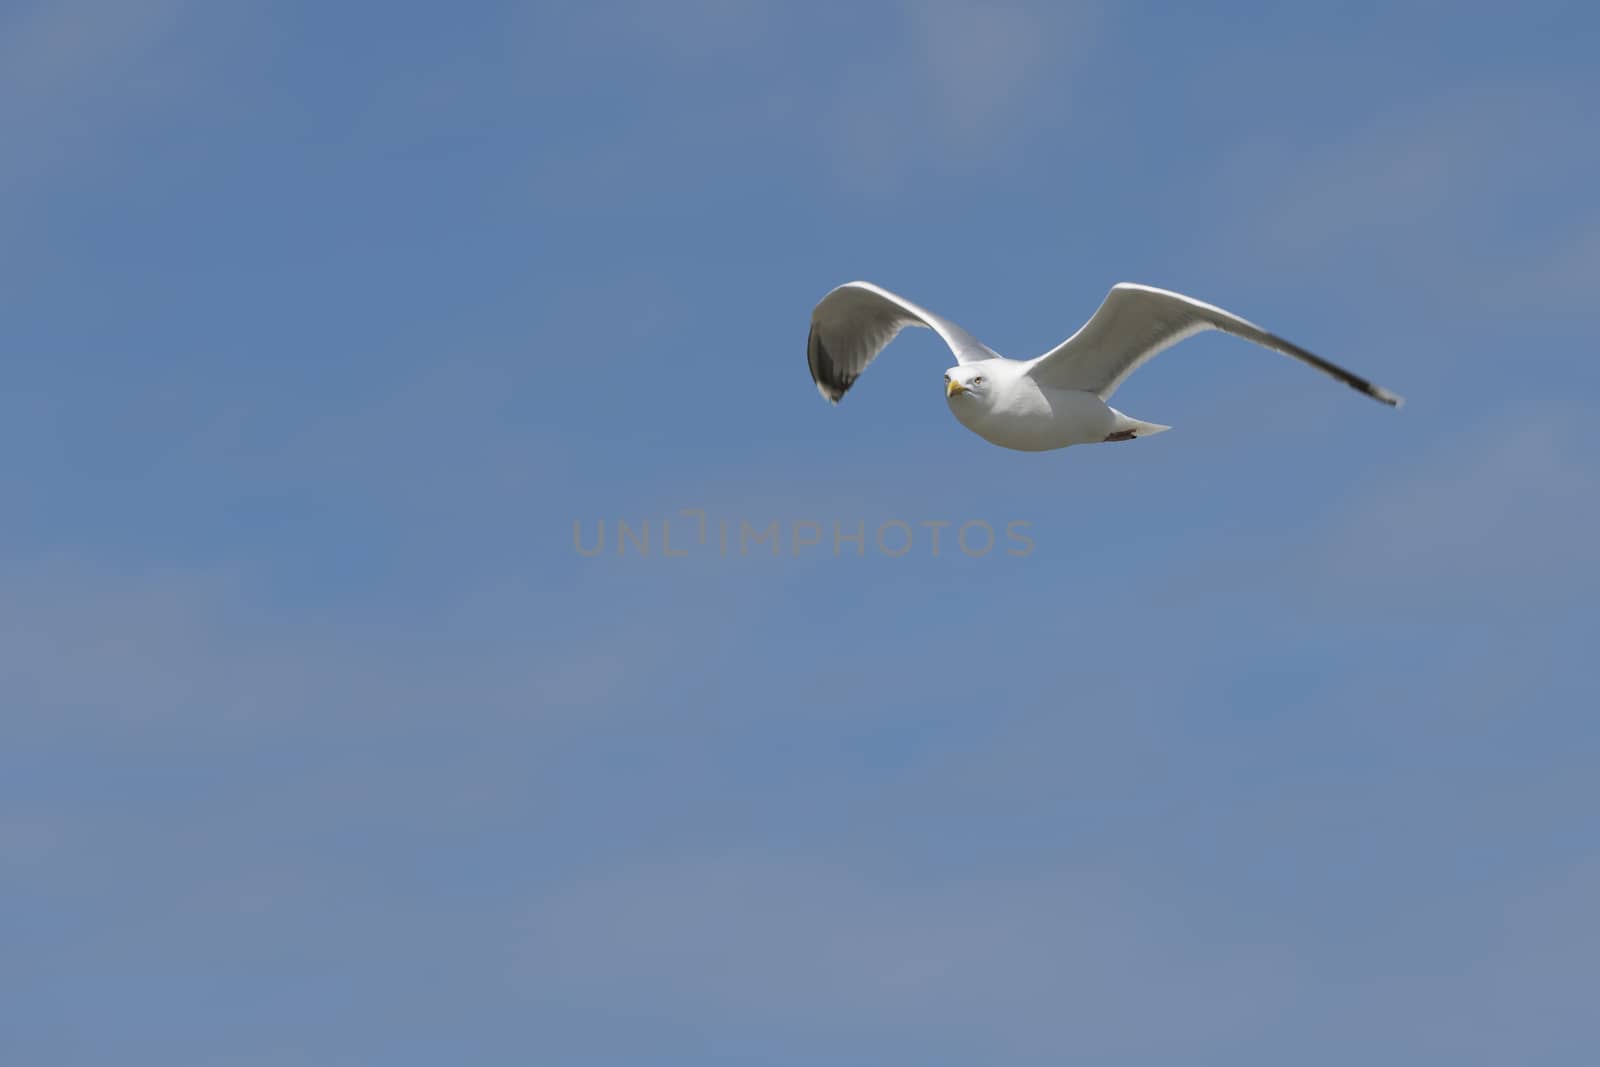 Seabird the Seagull against a blue sky
 by Tofotografie